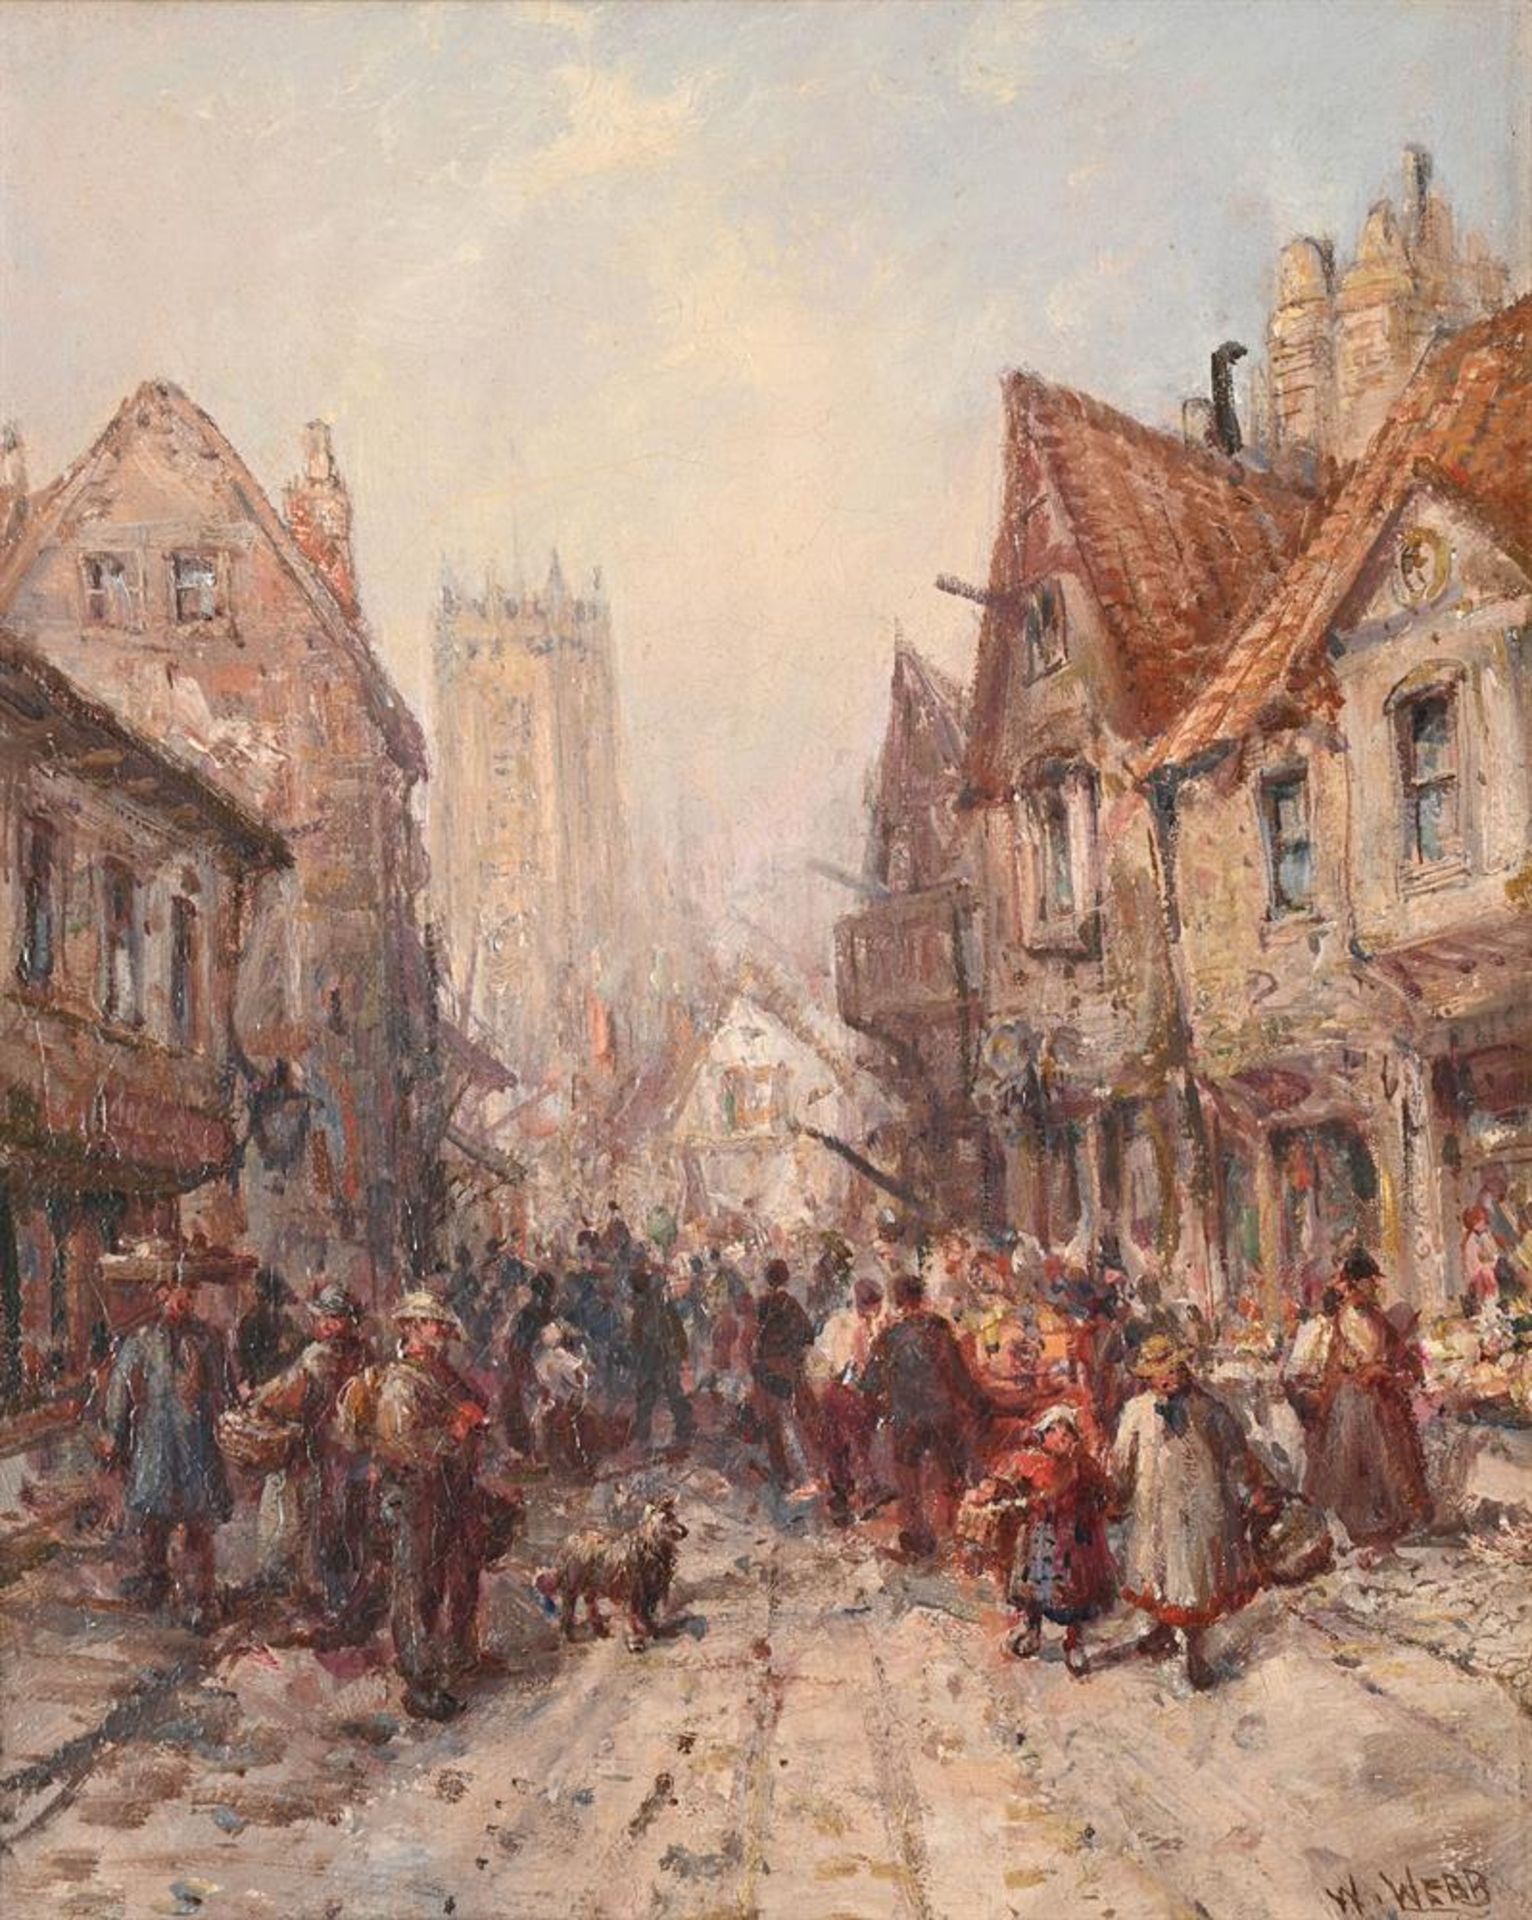 ENGLISH SCHOOL (19TH CENTURY), TWO BUSTLING TOWN SCENES - Image 5 of 7